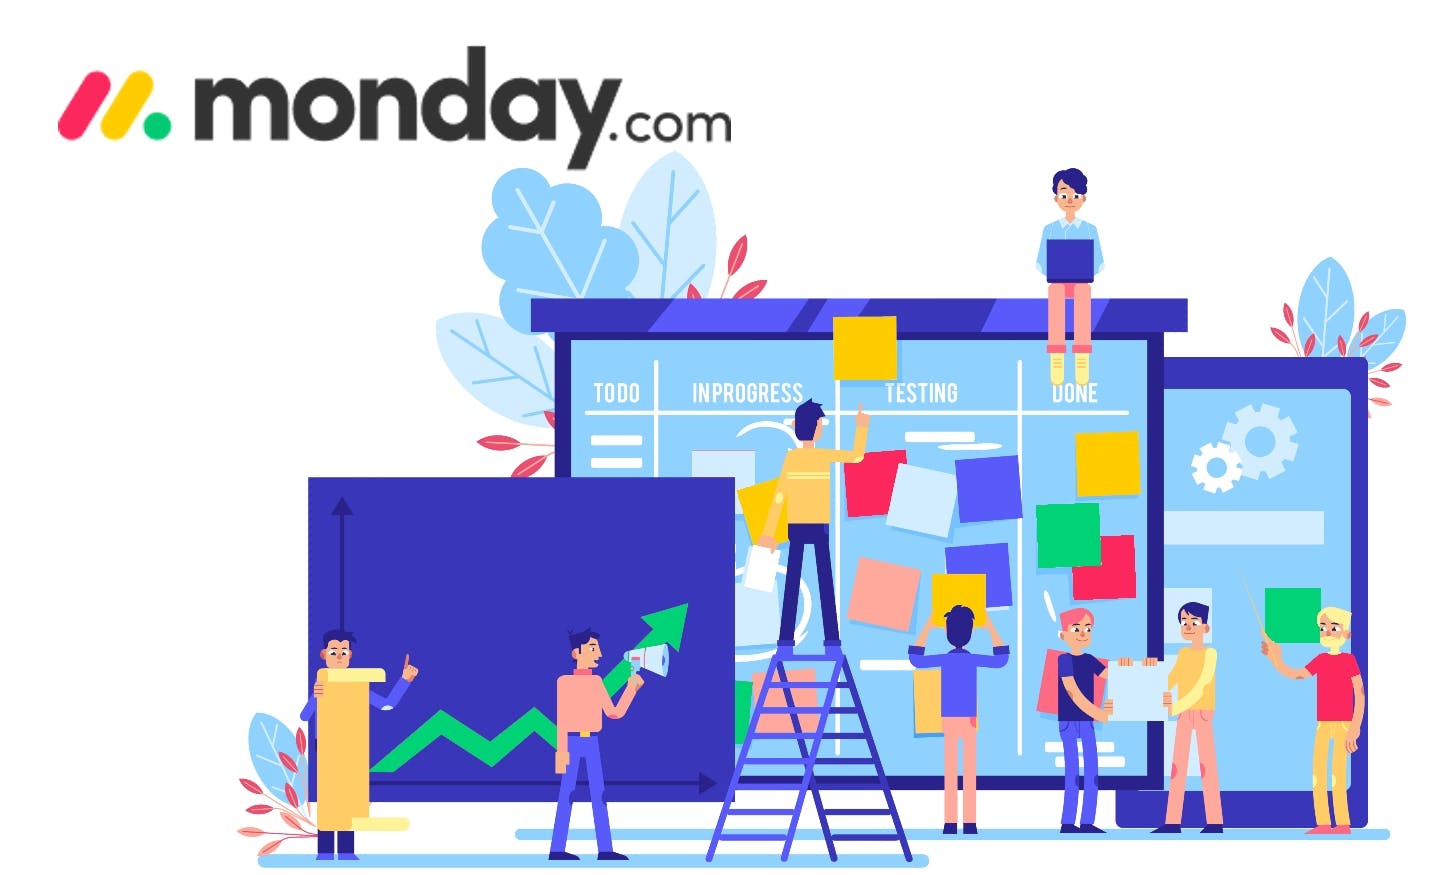 How monday.com’s Task Management Will Help You Improve Your Business